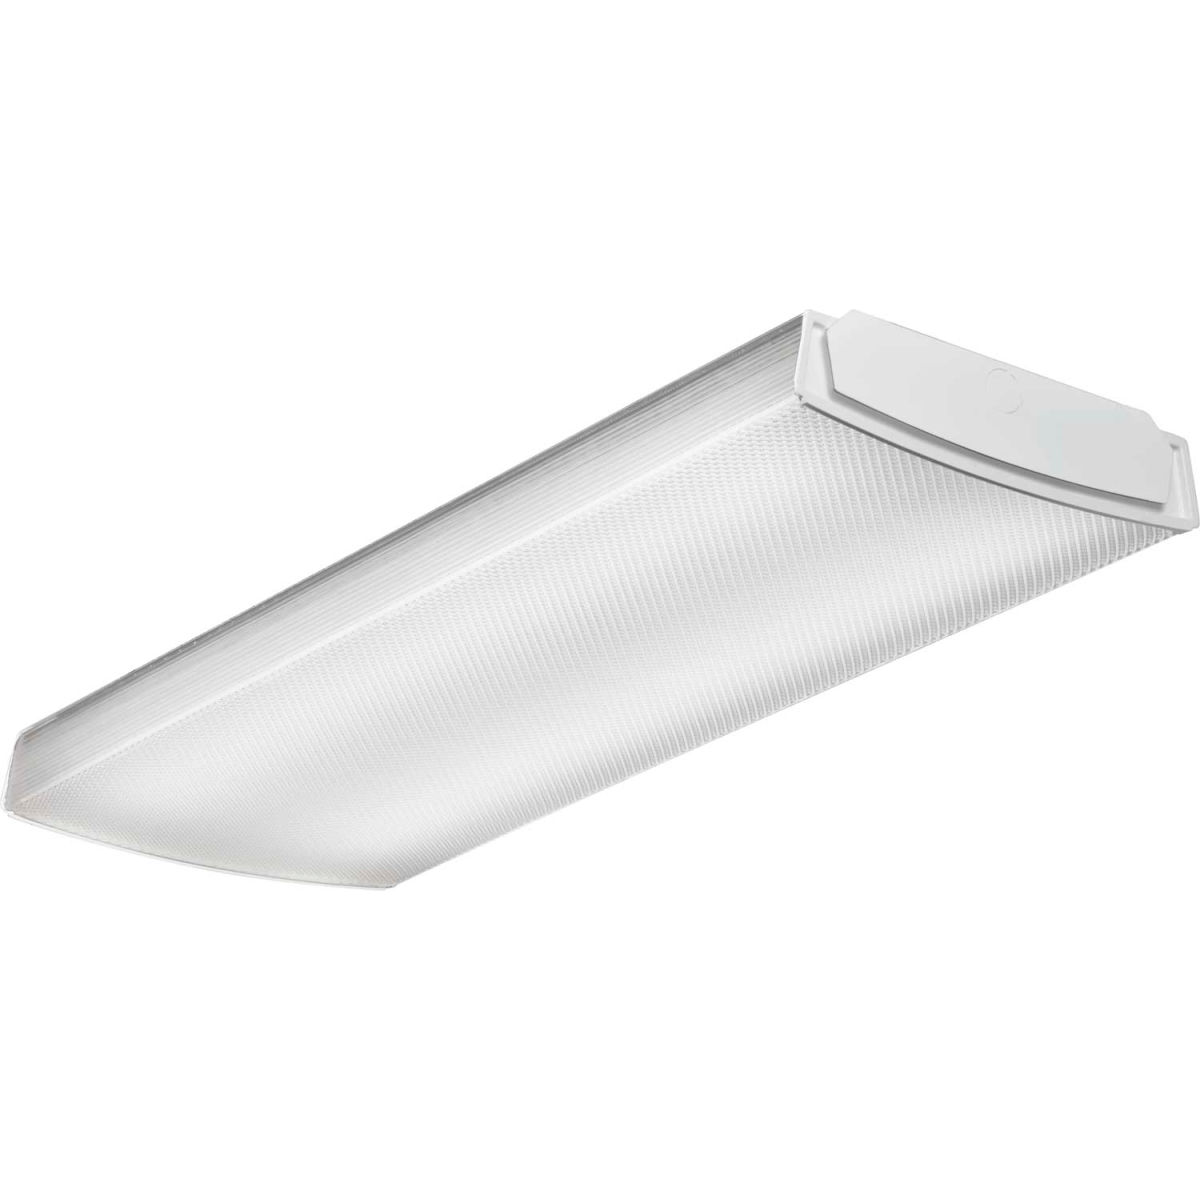 Picture of Acuity Brands B1477877 2000 Lumens Lithonia LBL2 LP835 2 ft. LED Wraparound Fixture